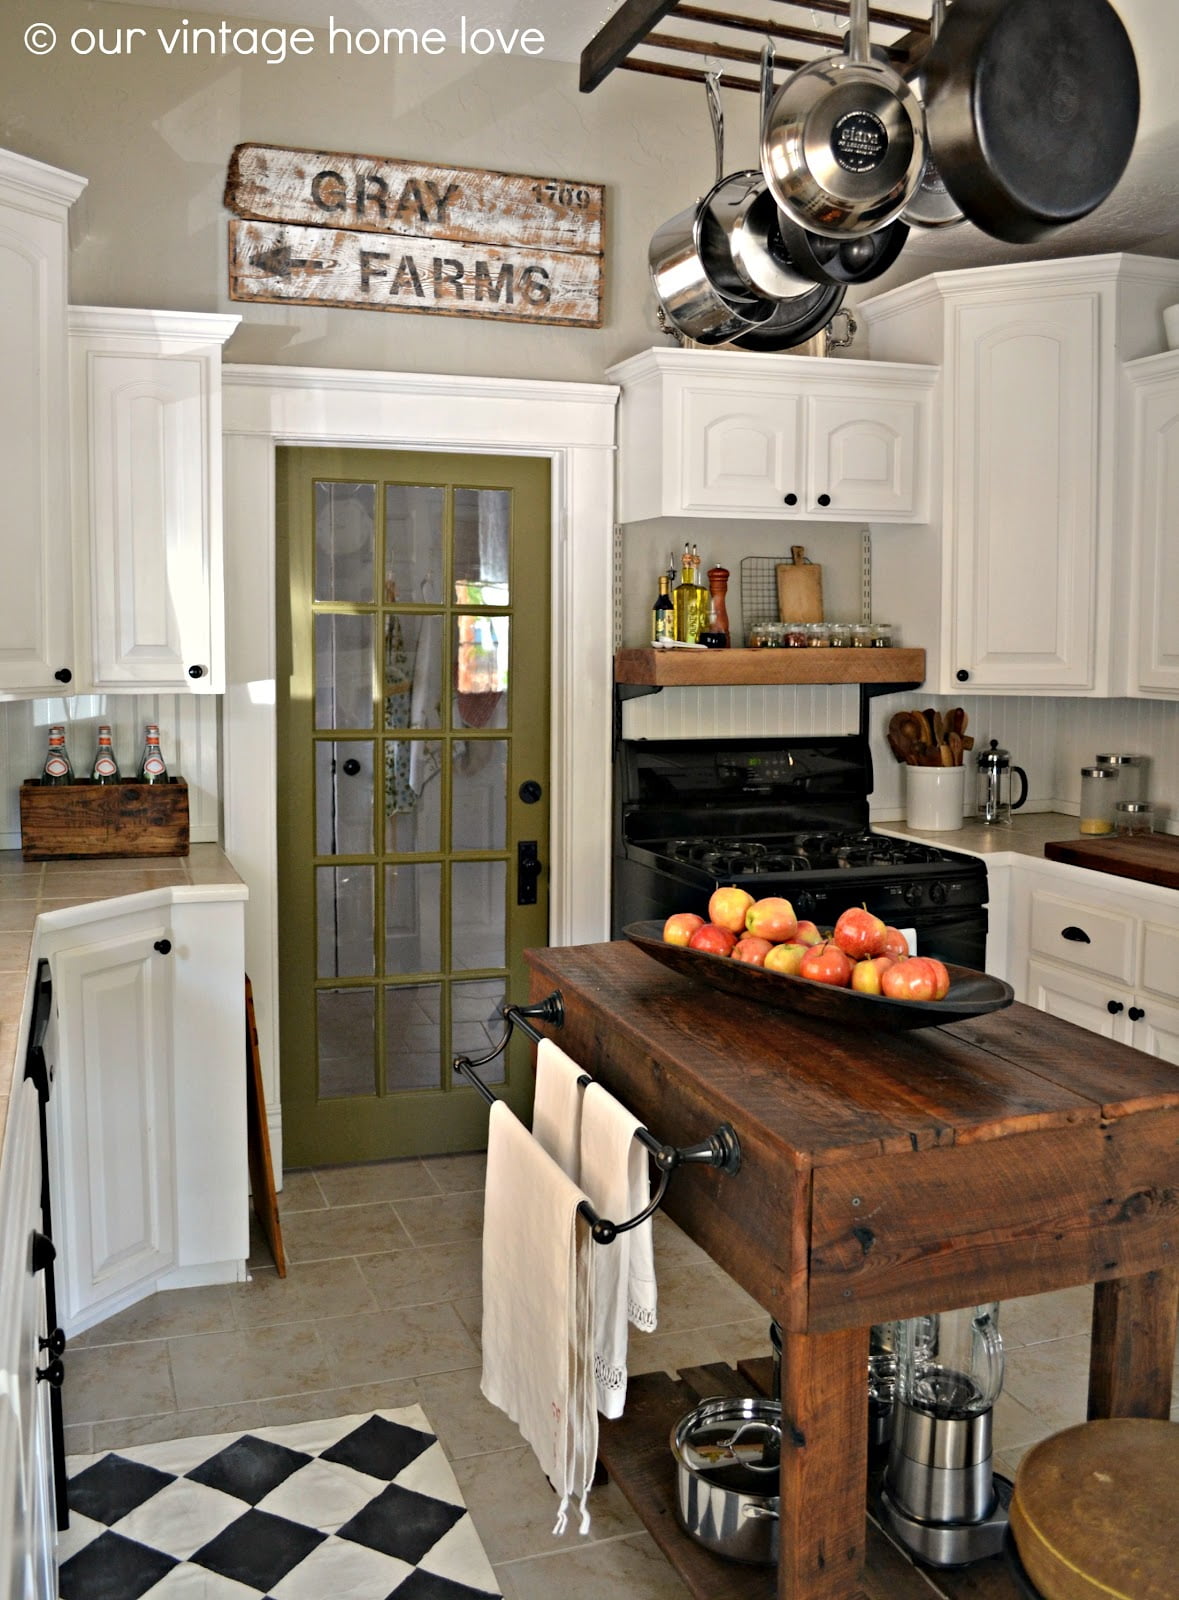 Rustic Kitchen Decor - Photos All Recommendation